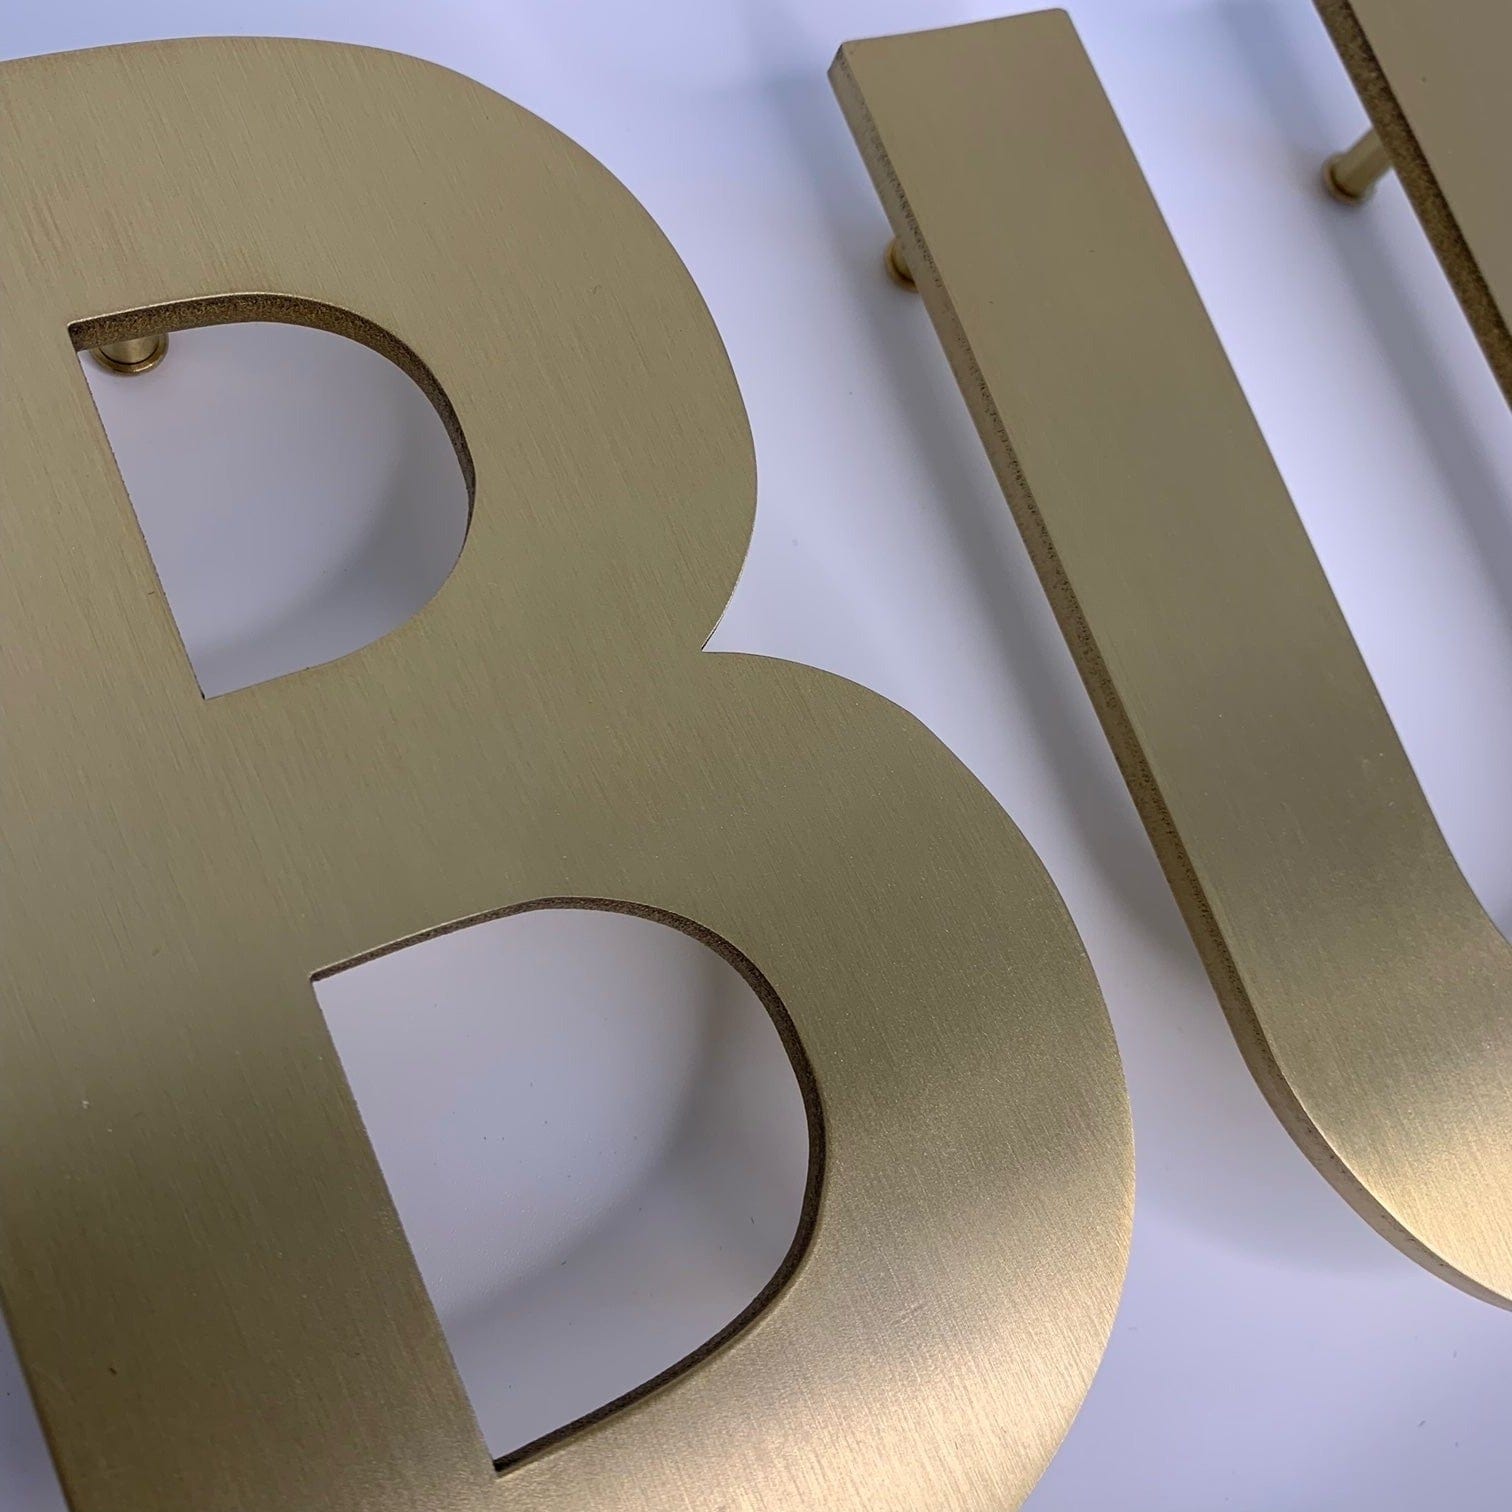 House Numbers and Letters Bayside Luxe Signage - Solid Satin Brass Floating House Numbers and Letters - Beaumaris Bay 20cm